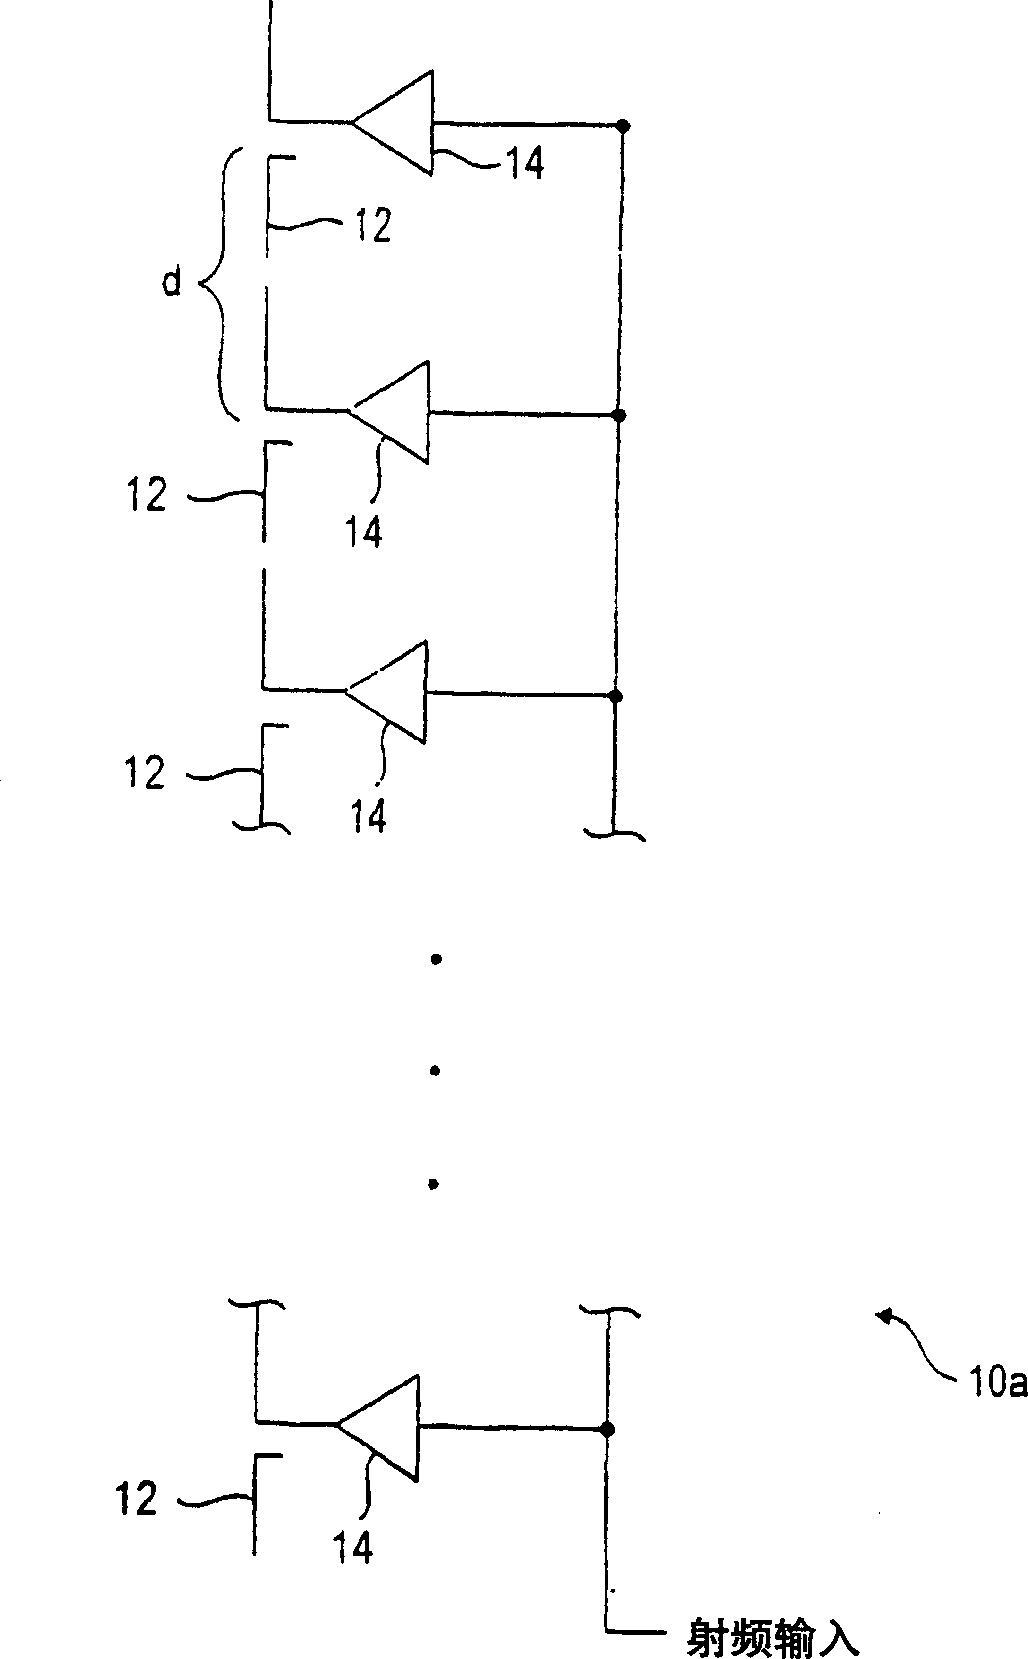 Distributed antenna system